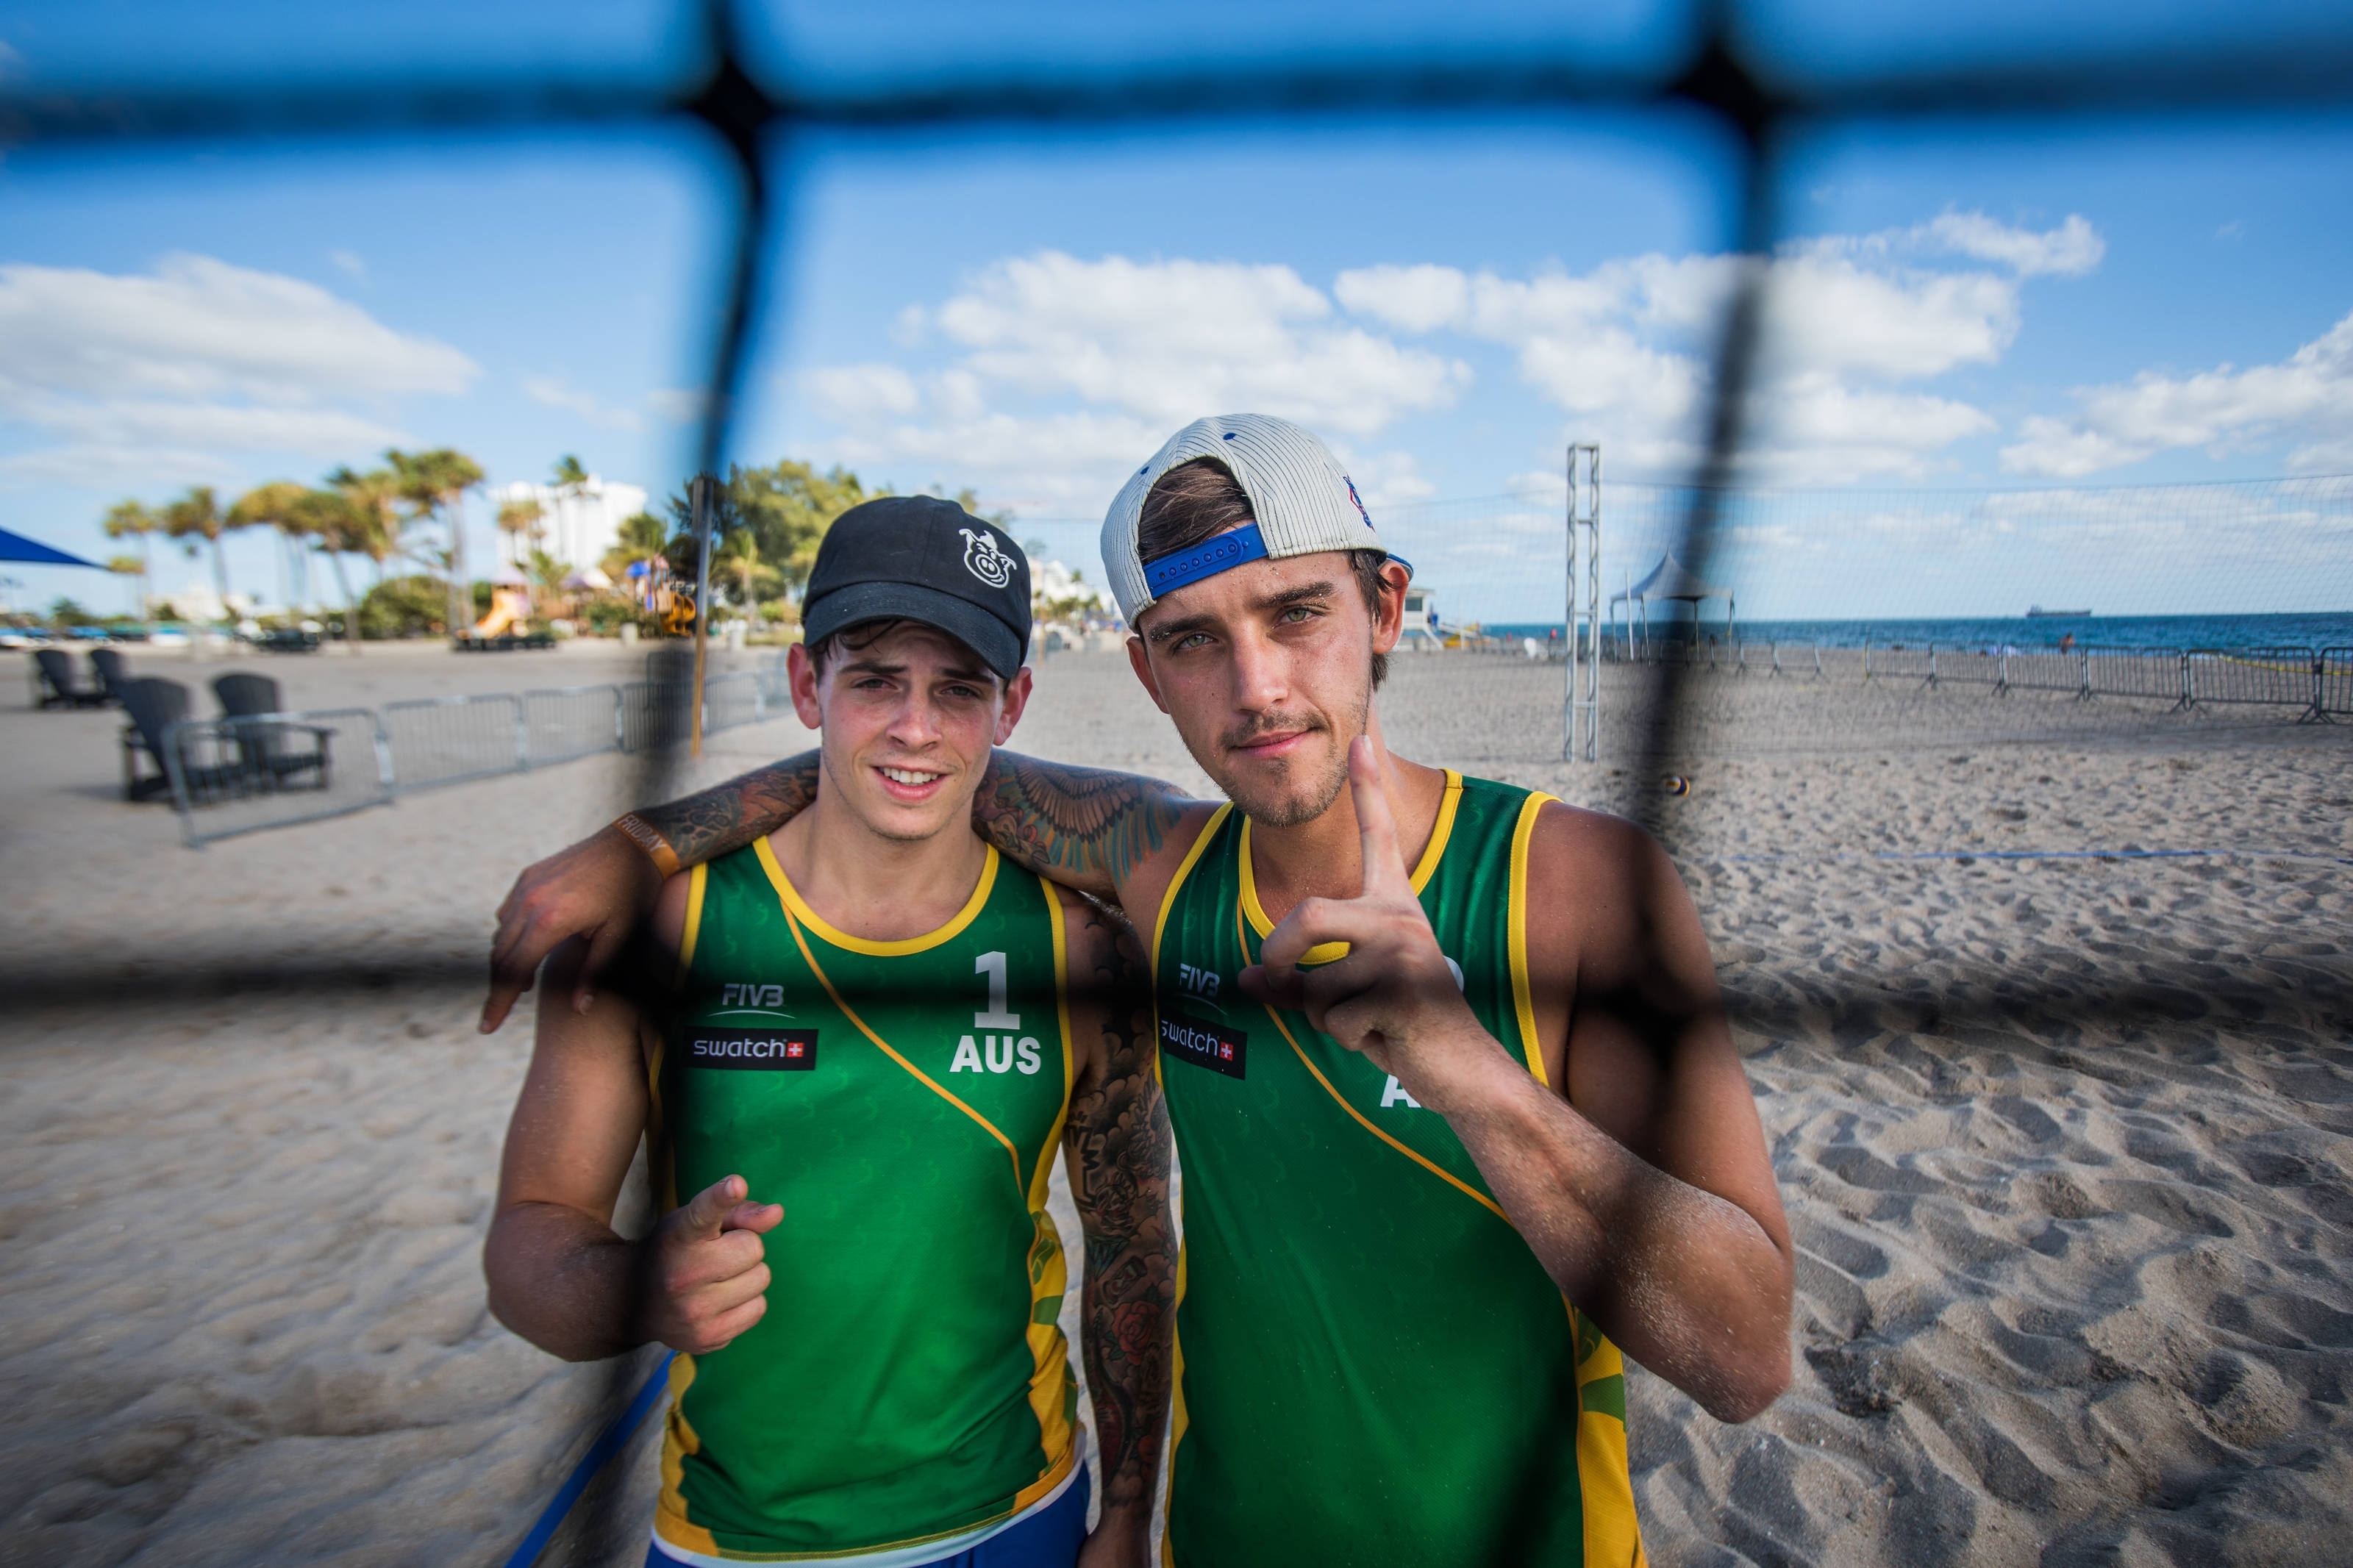 Beau Brooks (right) and Daniel Sayhounie on Fort Lauderdale Beach. Photocredit: Ian Witlen.